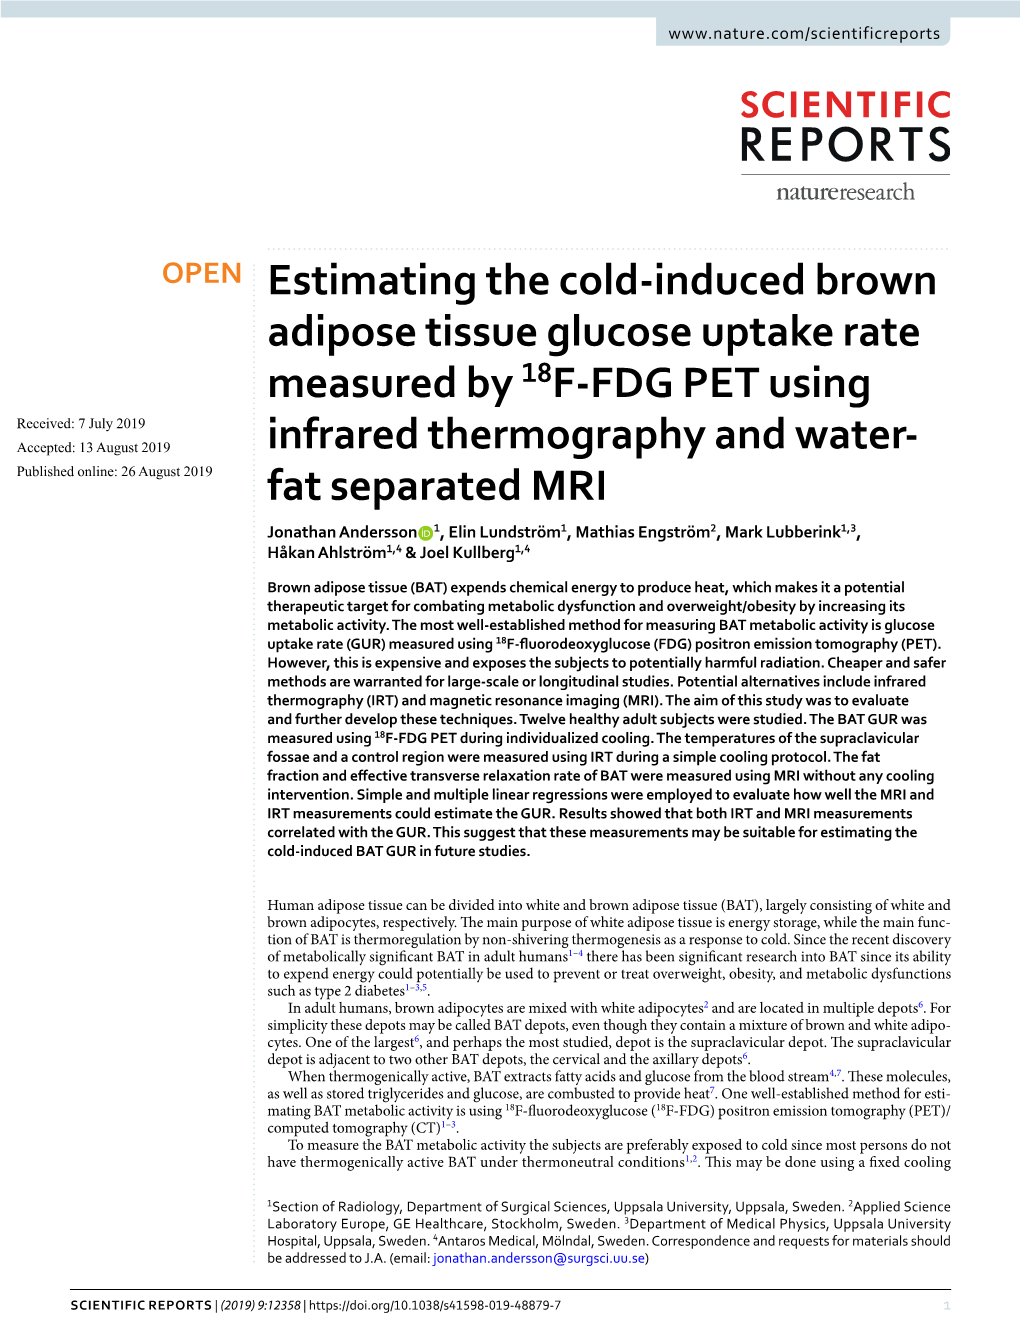 Estimating the Cold-Induced Brown Adipose Tissue Glucose Uptake Rate